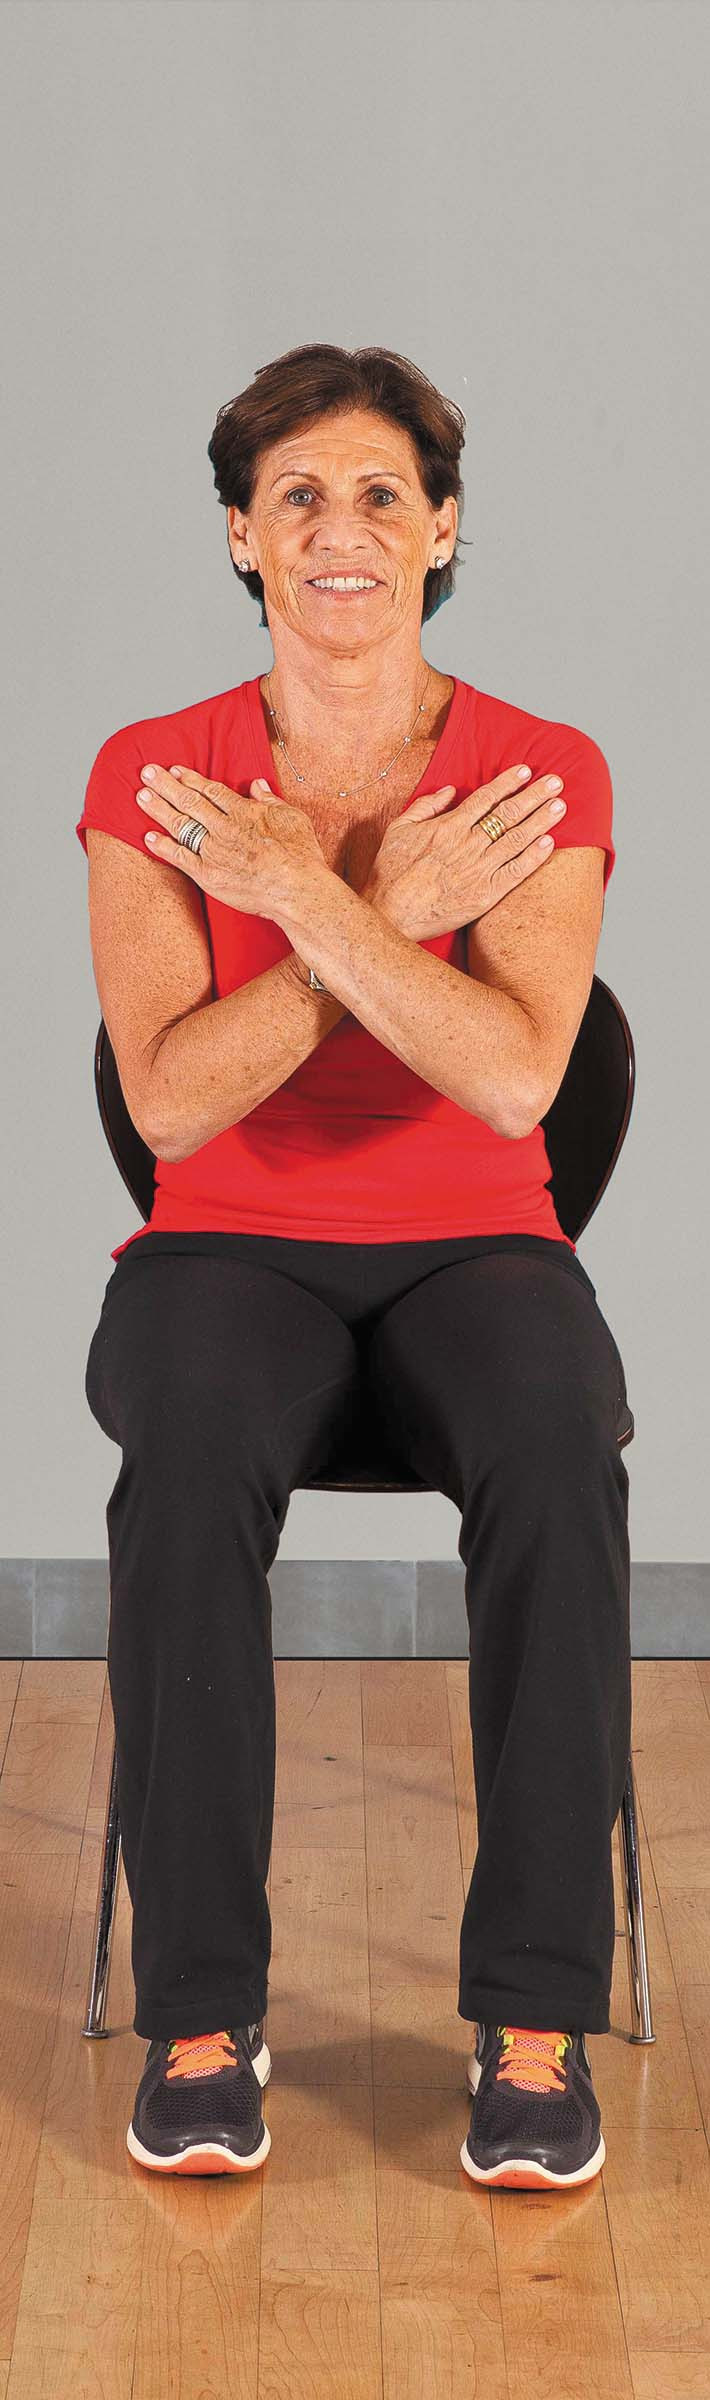 photo of a woman in the starting position for the sit to stand (no hands) exercise as described in the article